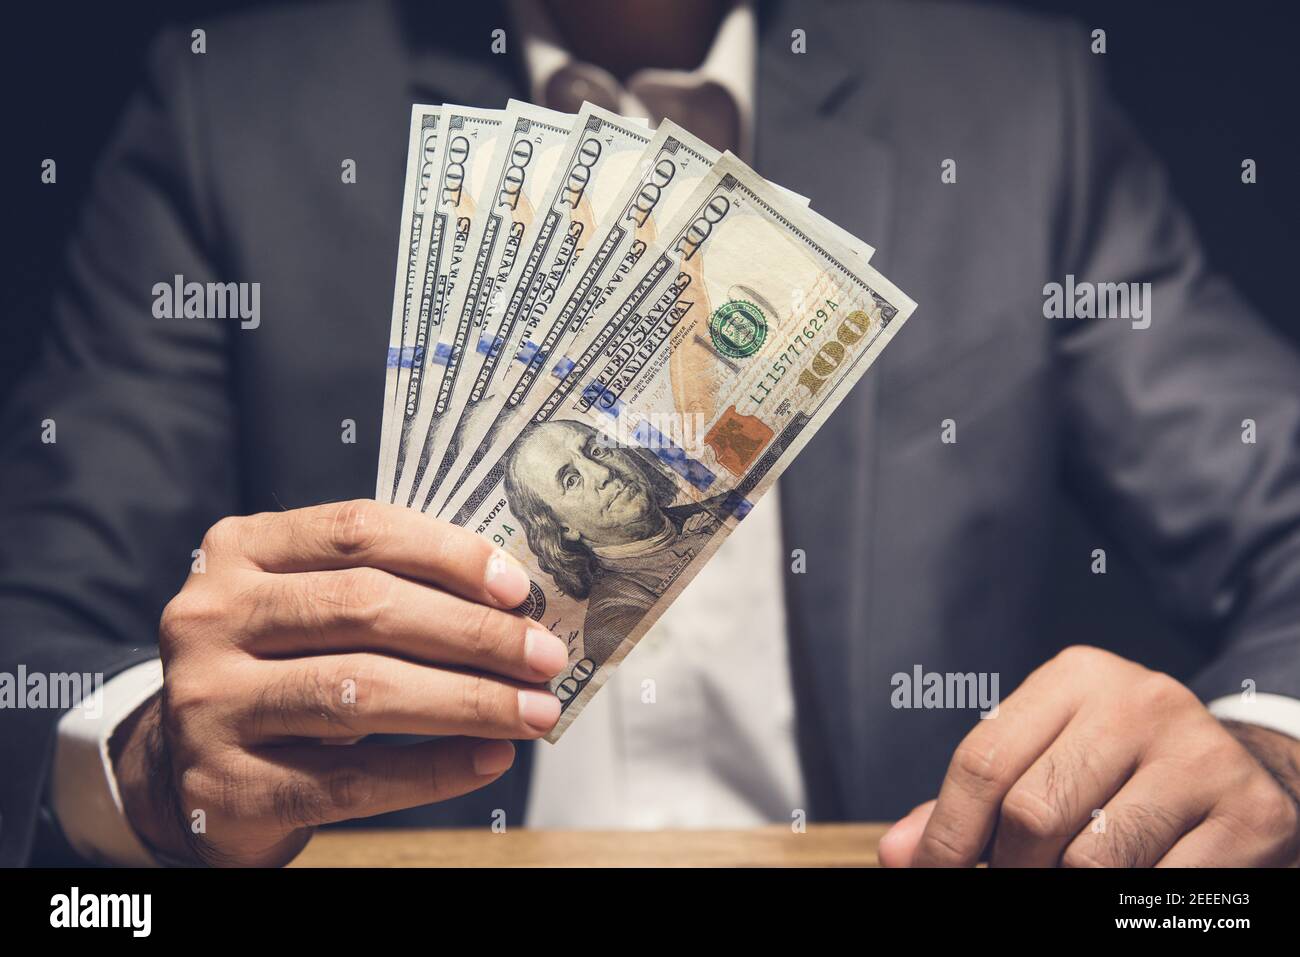 Businessman showing US dollar bills at the table in dark background - making money, bribery and venality concepts Stock Photo